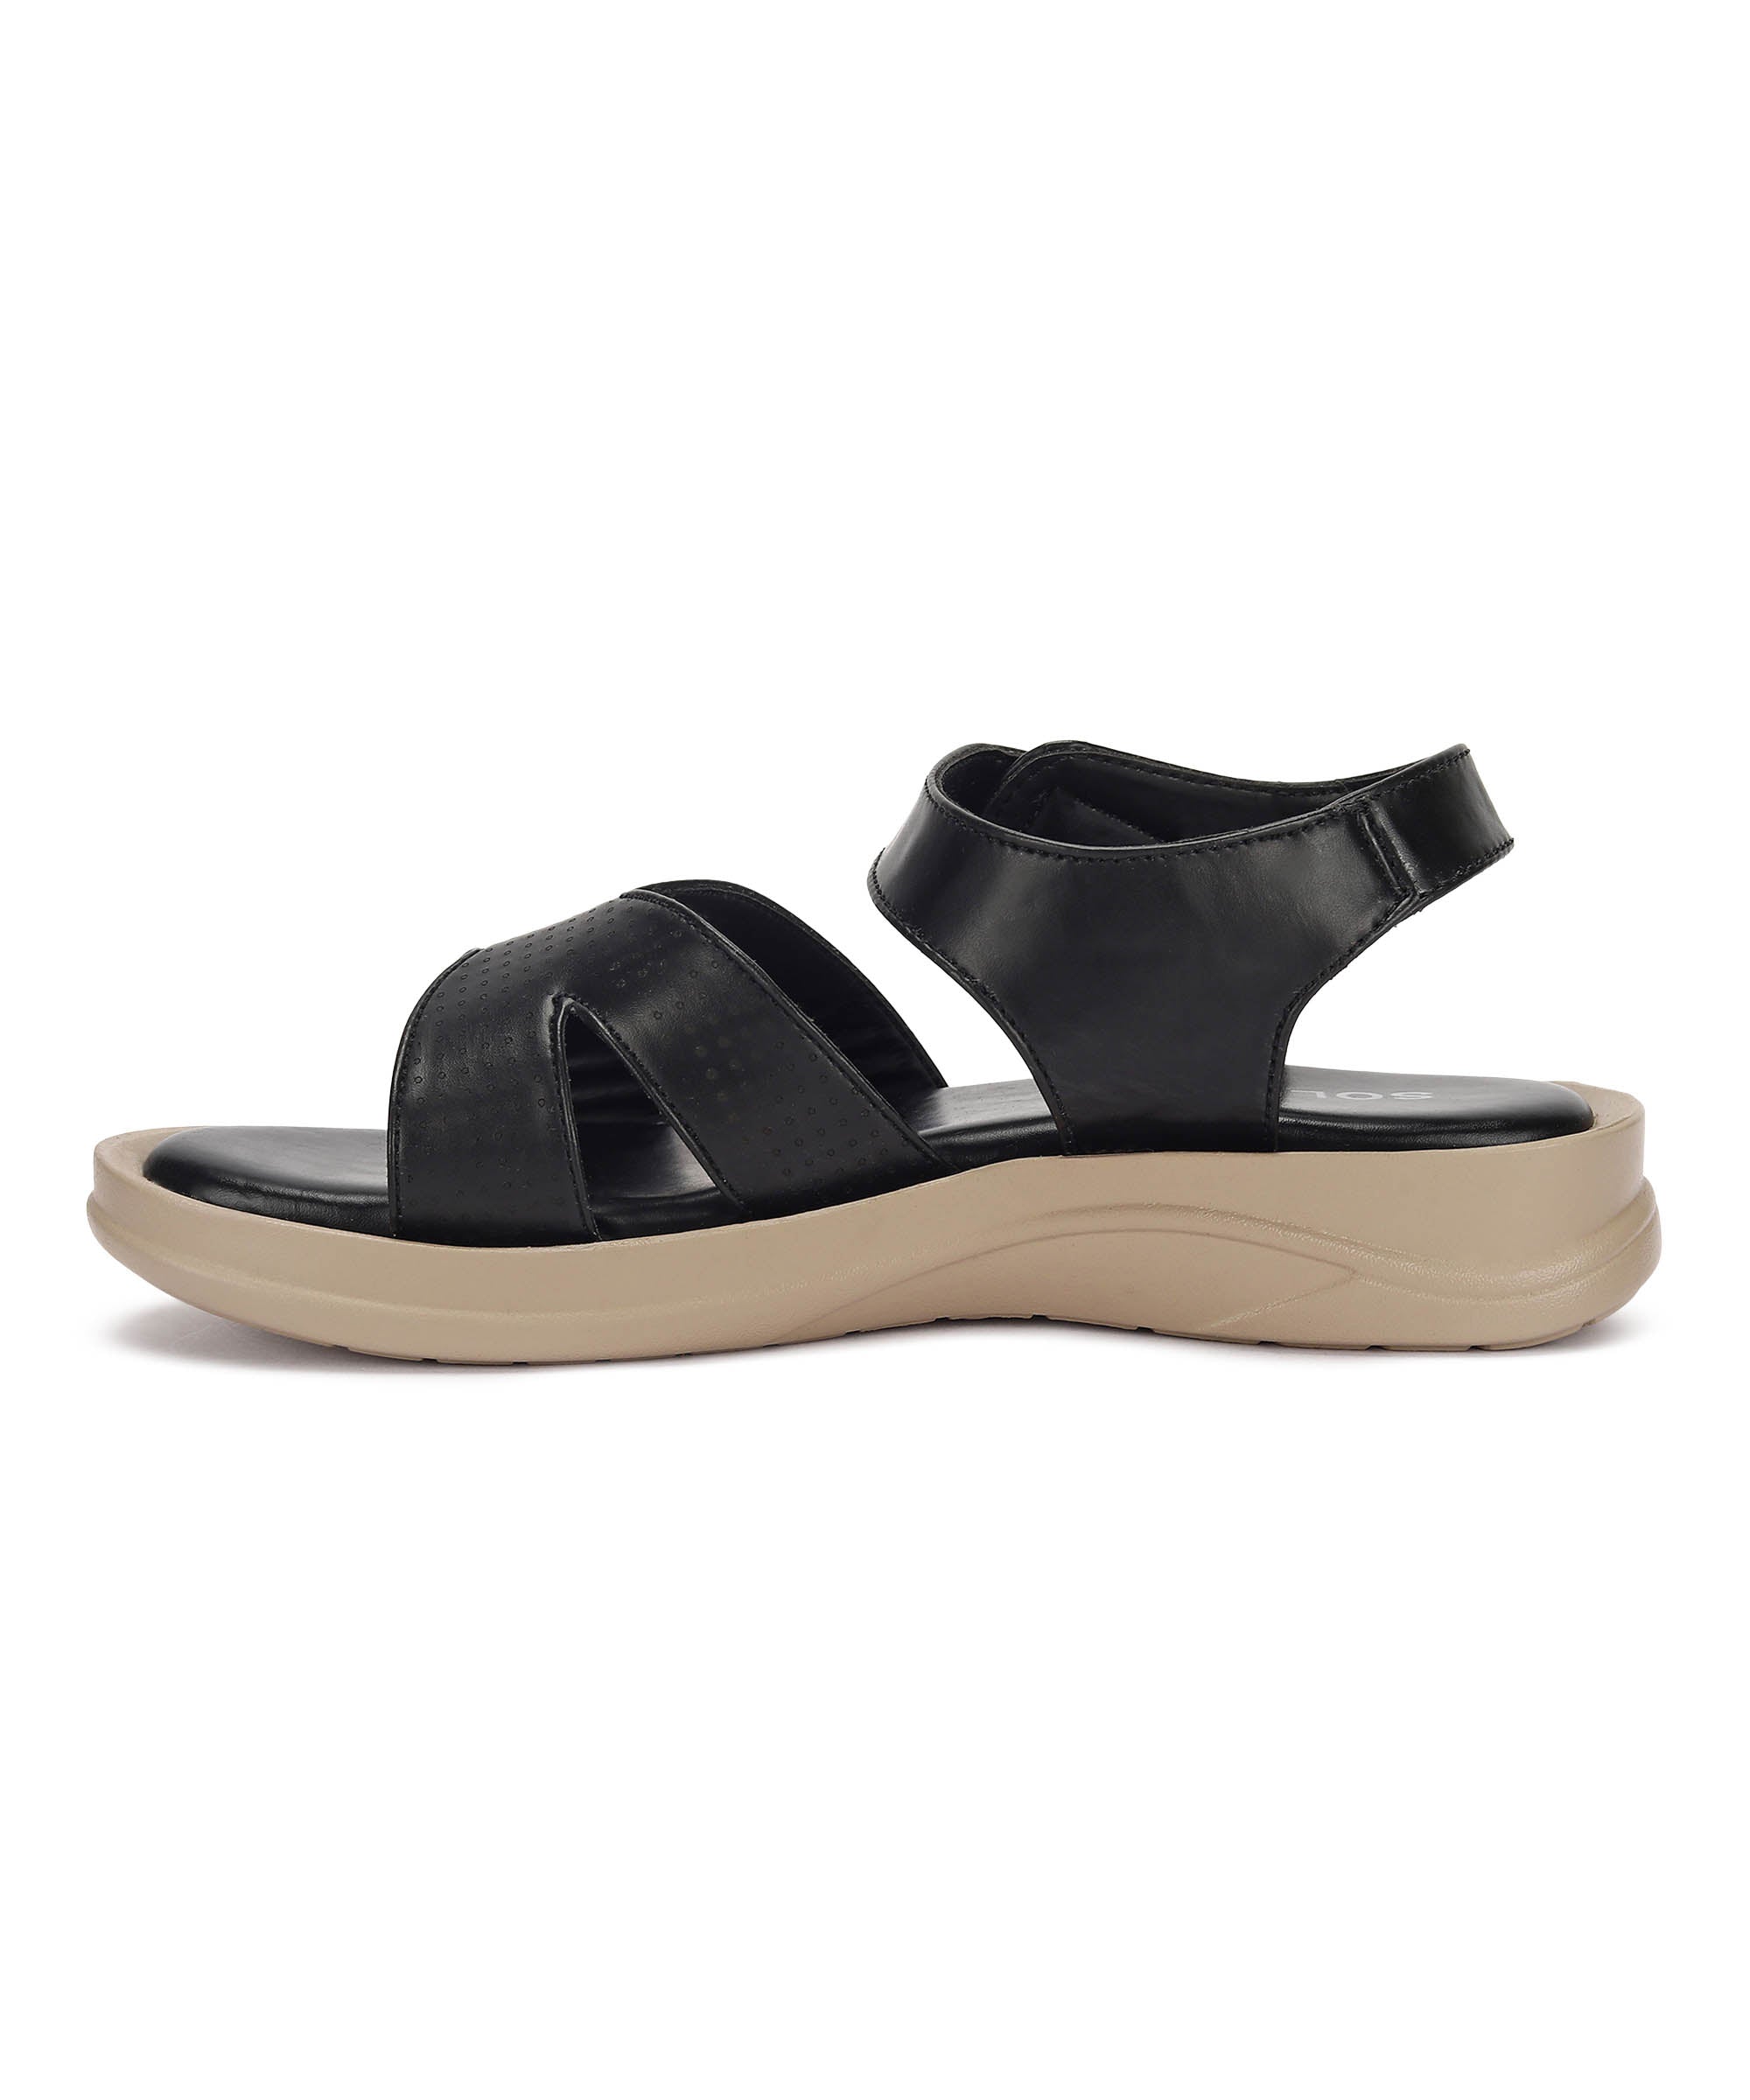 Paragon K6021L  Women Sandals | Casual &amp; Formal Sandals | Stylish, Comfortable &amp; Durable | For Daily &amp; Occasion Wear